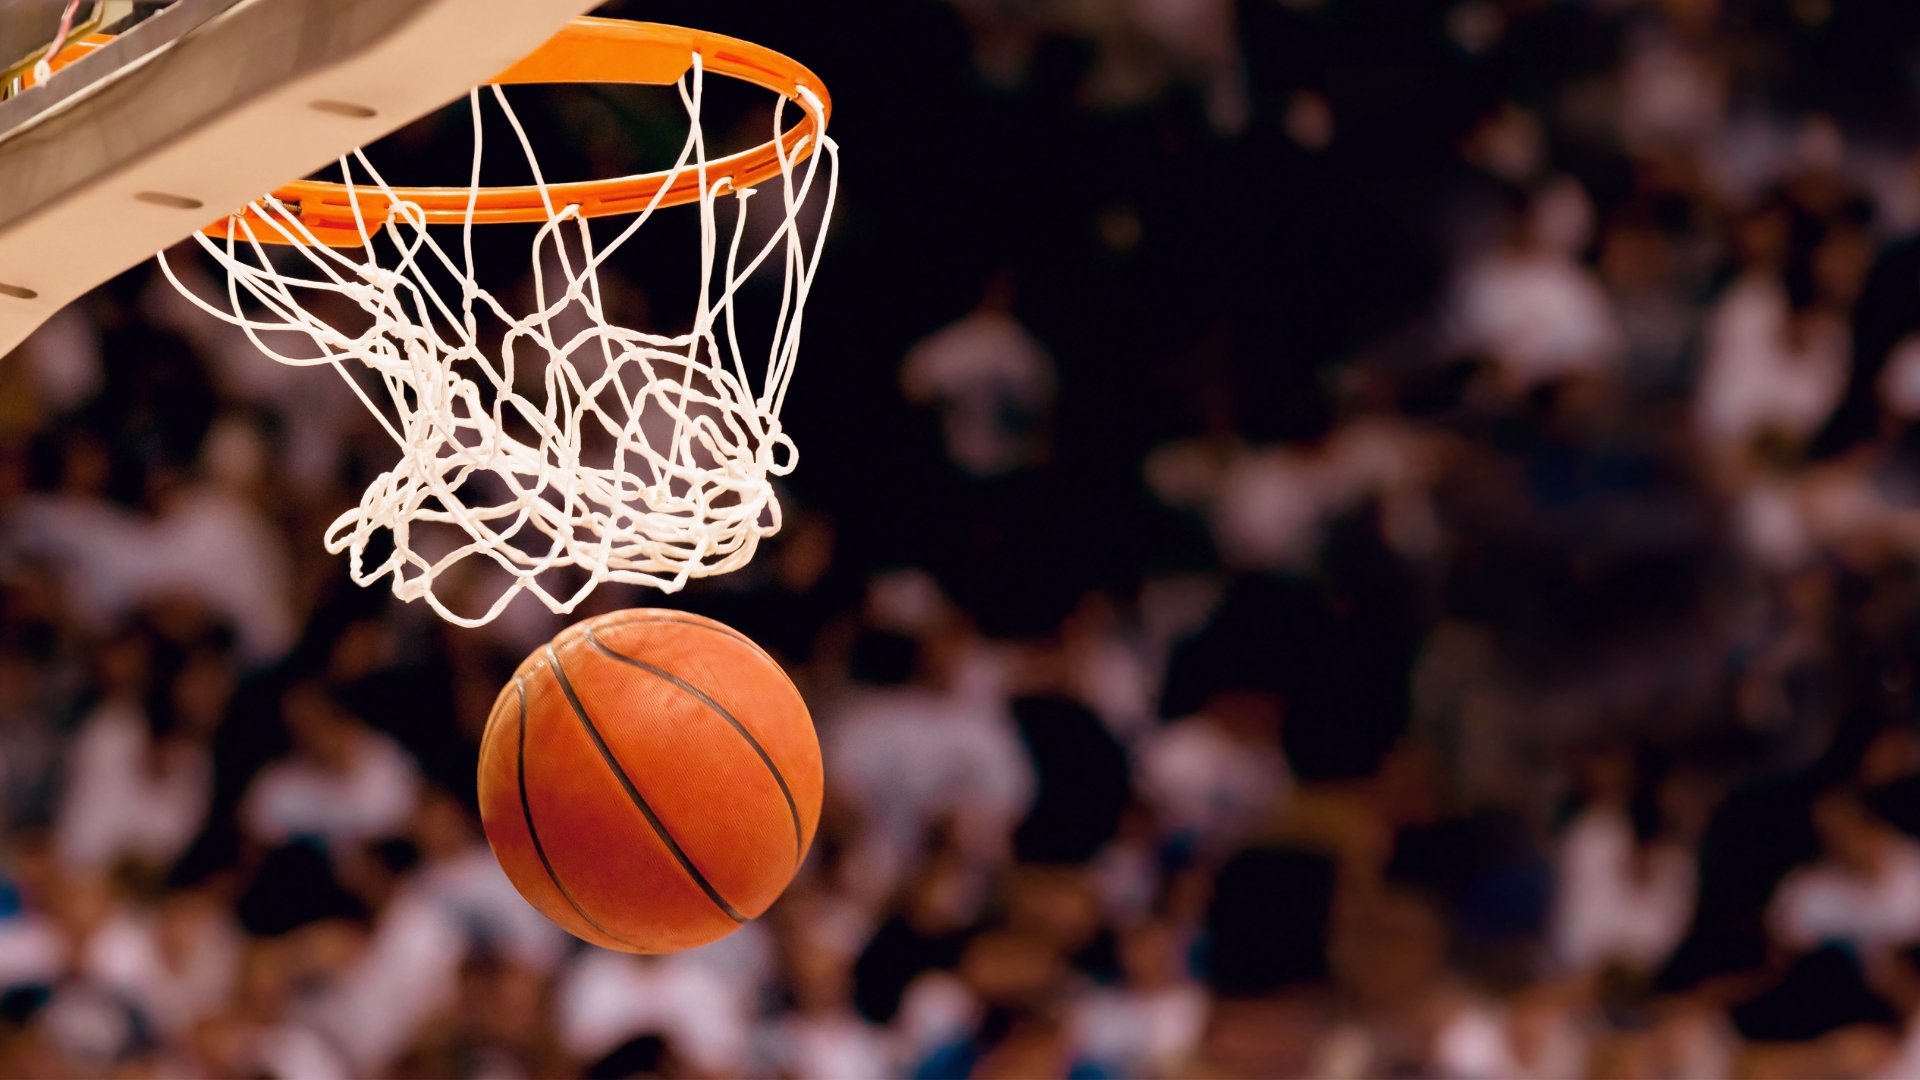 20 4k Ultra Hd Basketball Wallpapers Background Images